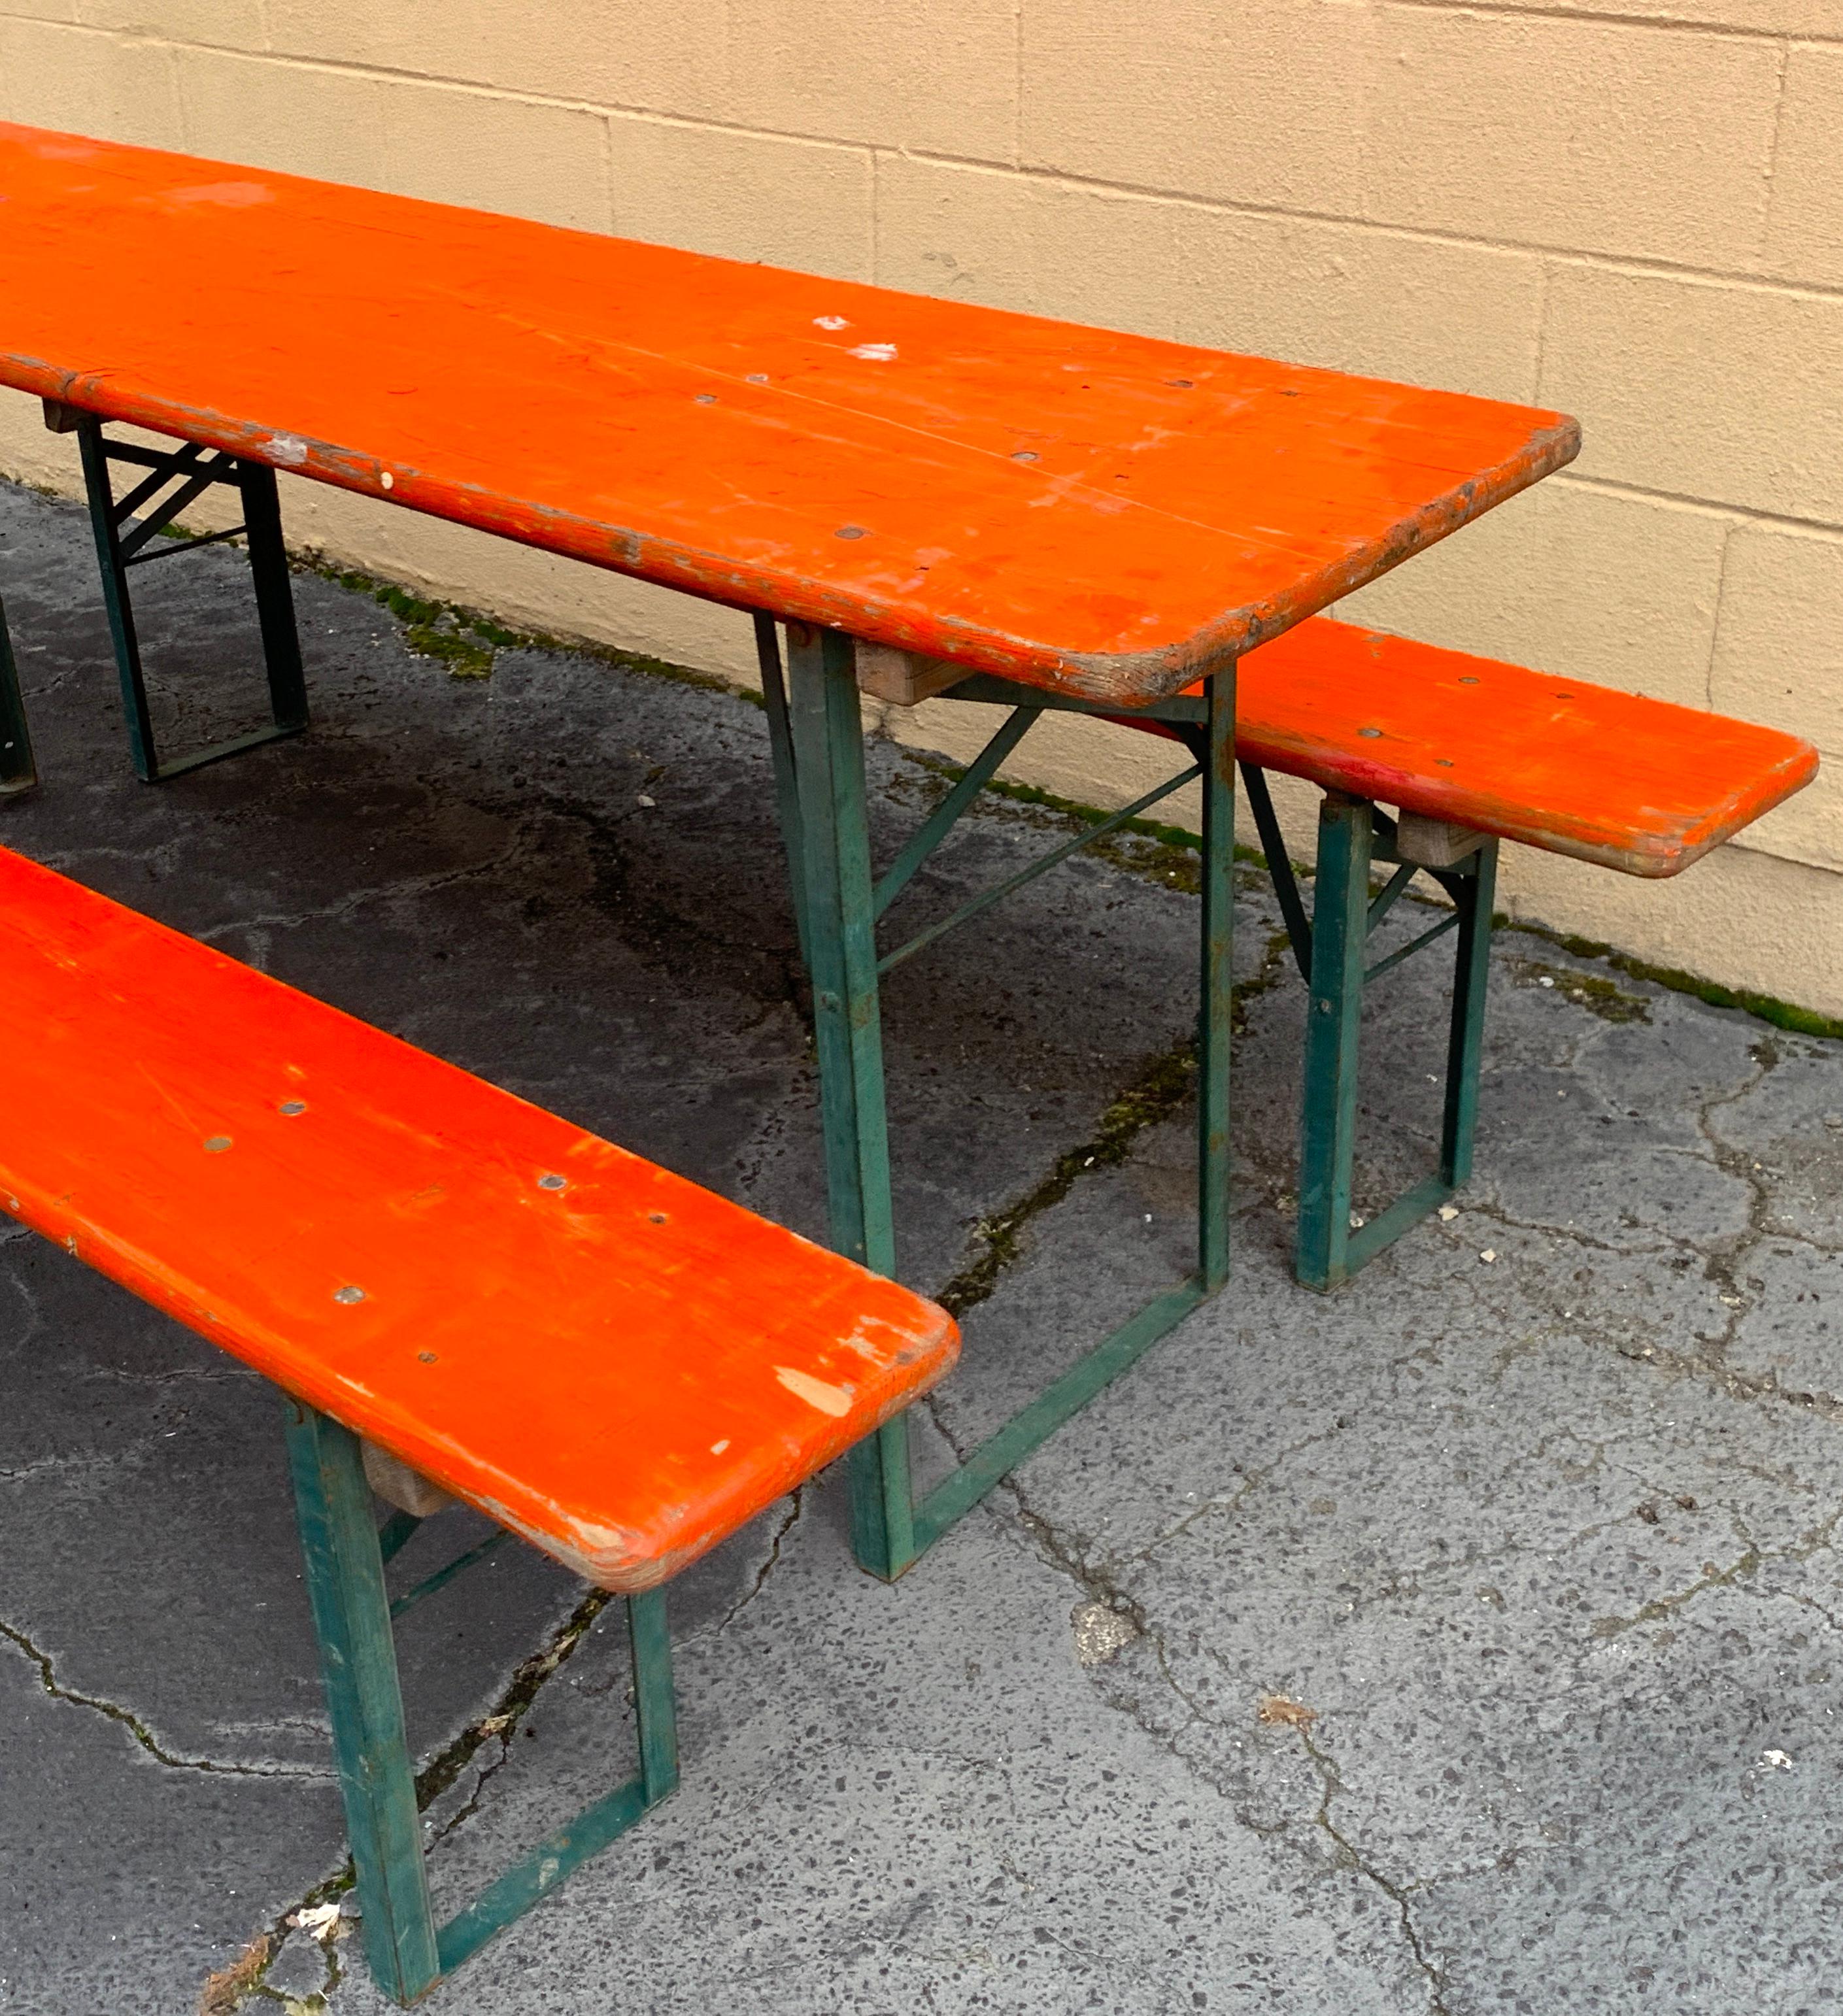 Vintage Collapsable German beer garden table and bench set, in orange
Consisting of a folding table and two folding benches in vintage orange paint.
Great size and color, very sturdy, show signs of use and patina. Structurally sound, mechanics